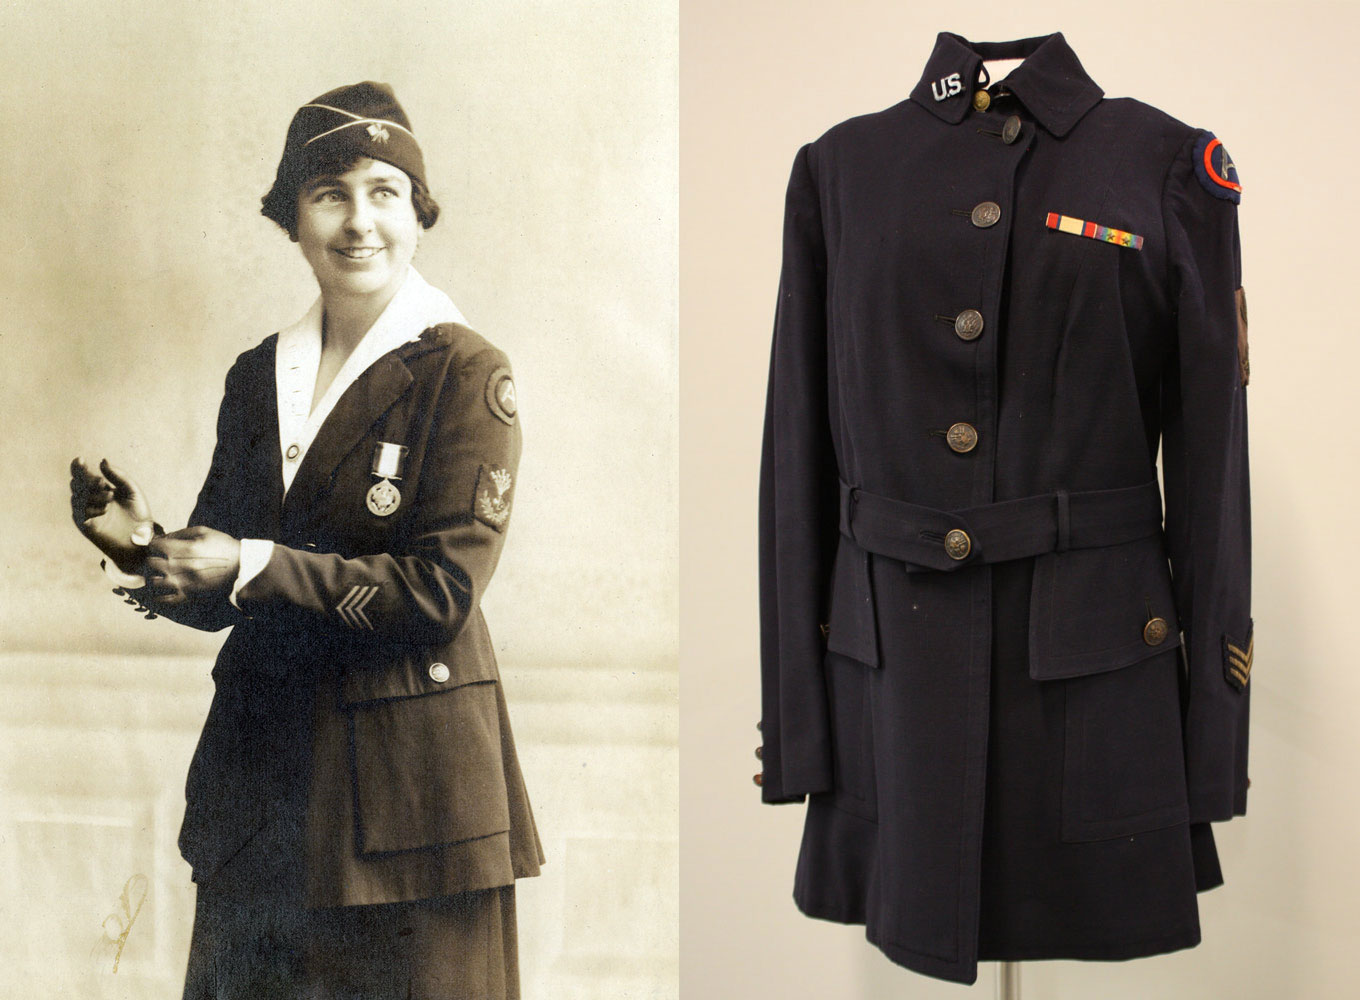 Portrait photo of Grace Banker in her uniform at left, Contemporary photograph of her uniform jacket at right